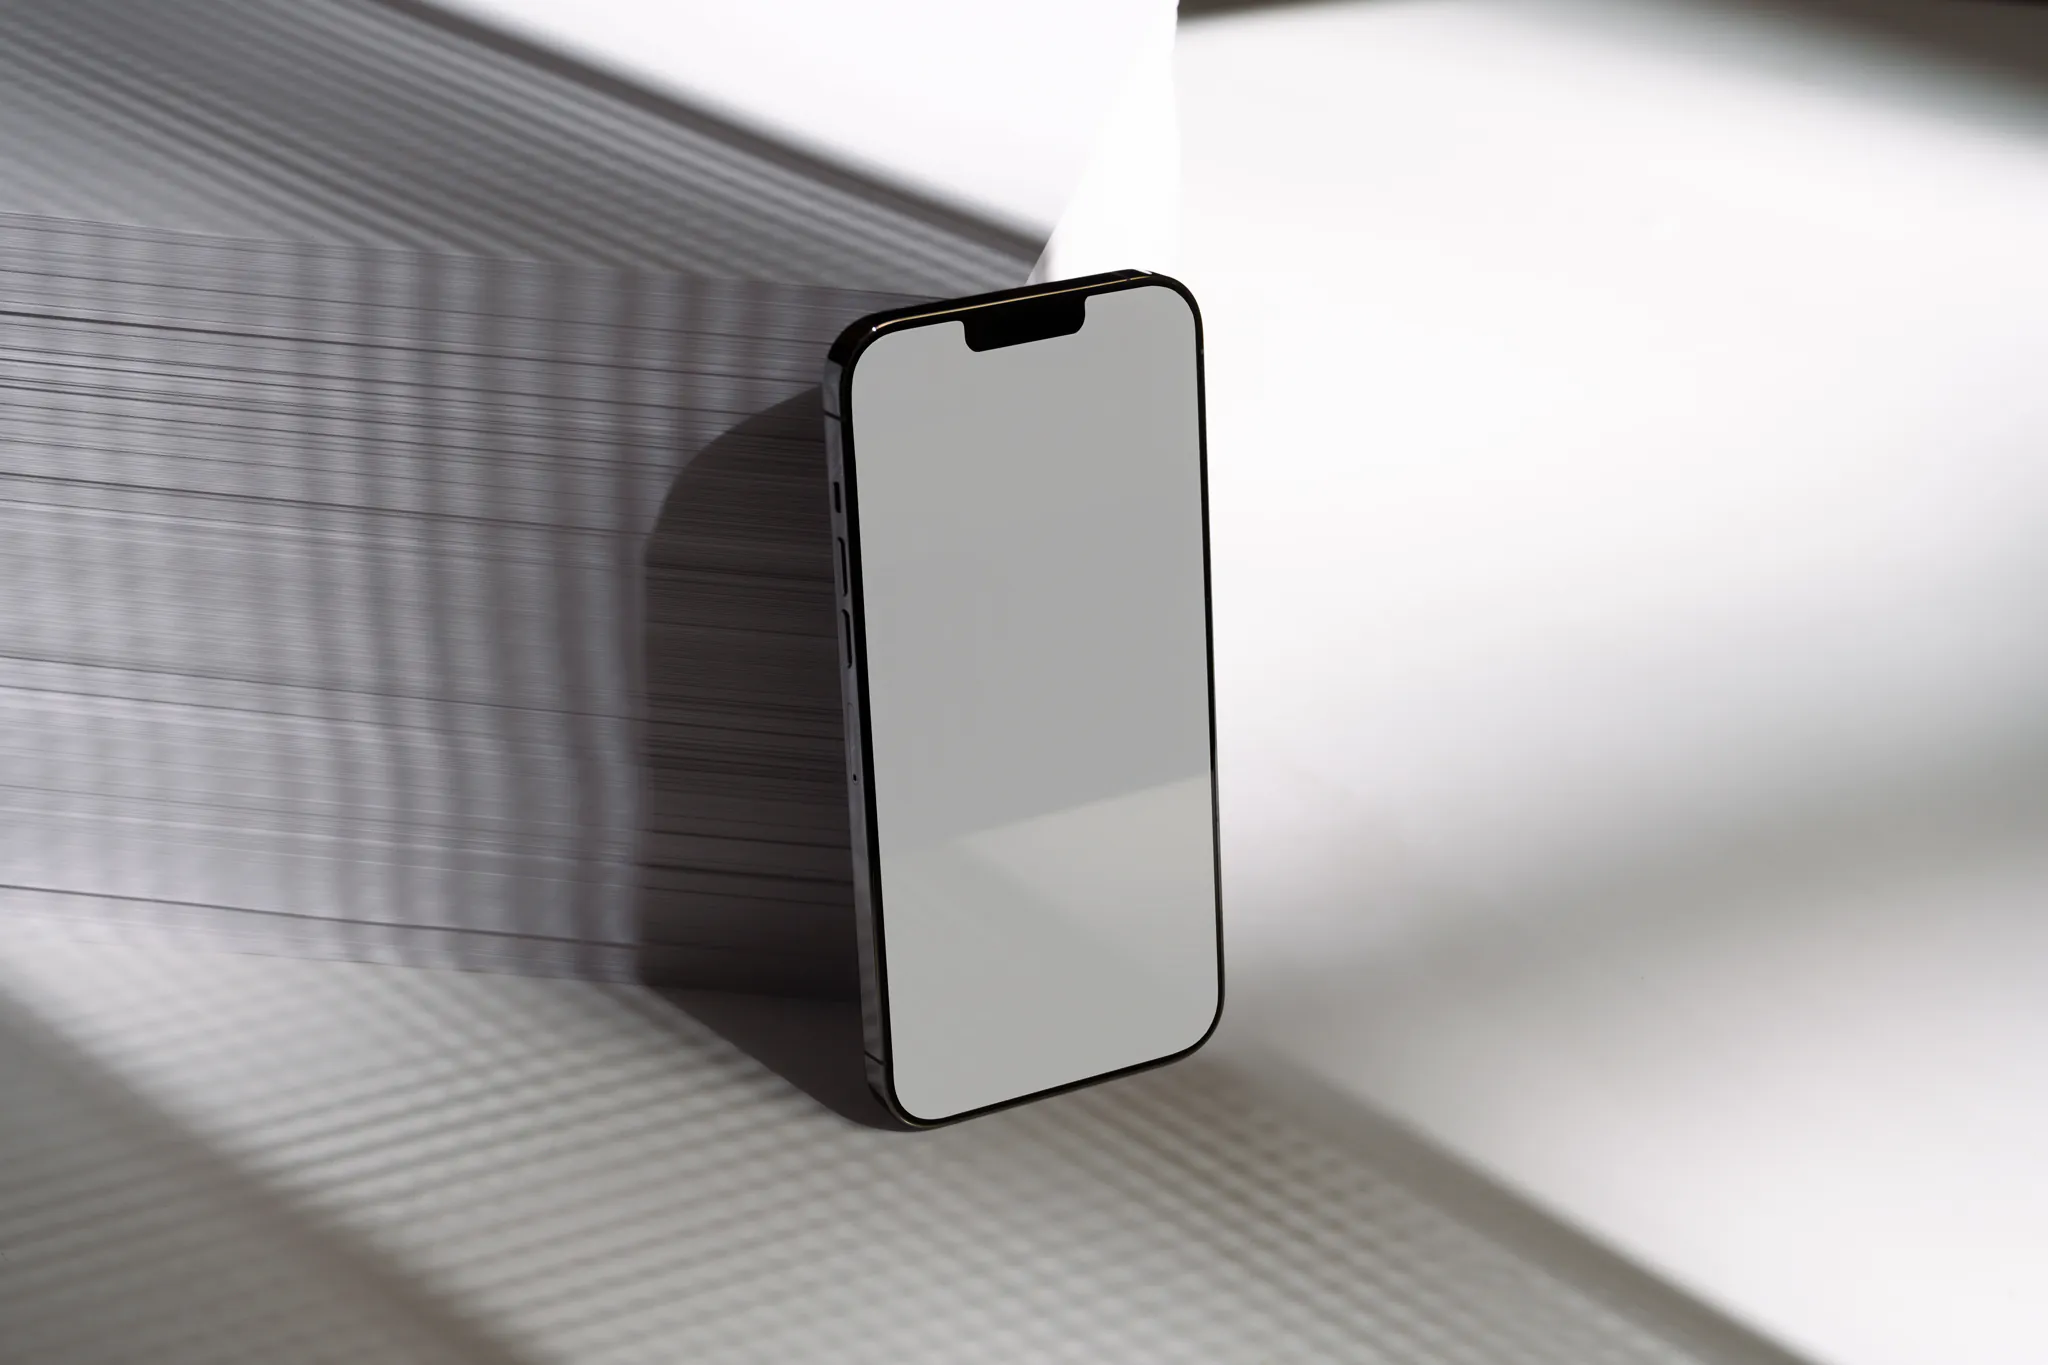 iPhone mockup. iPhone leaning against a block of A4 Format. Tech mockup.